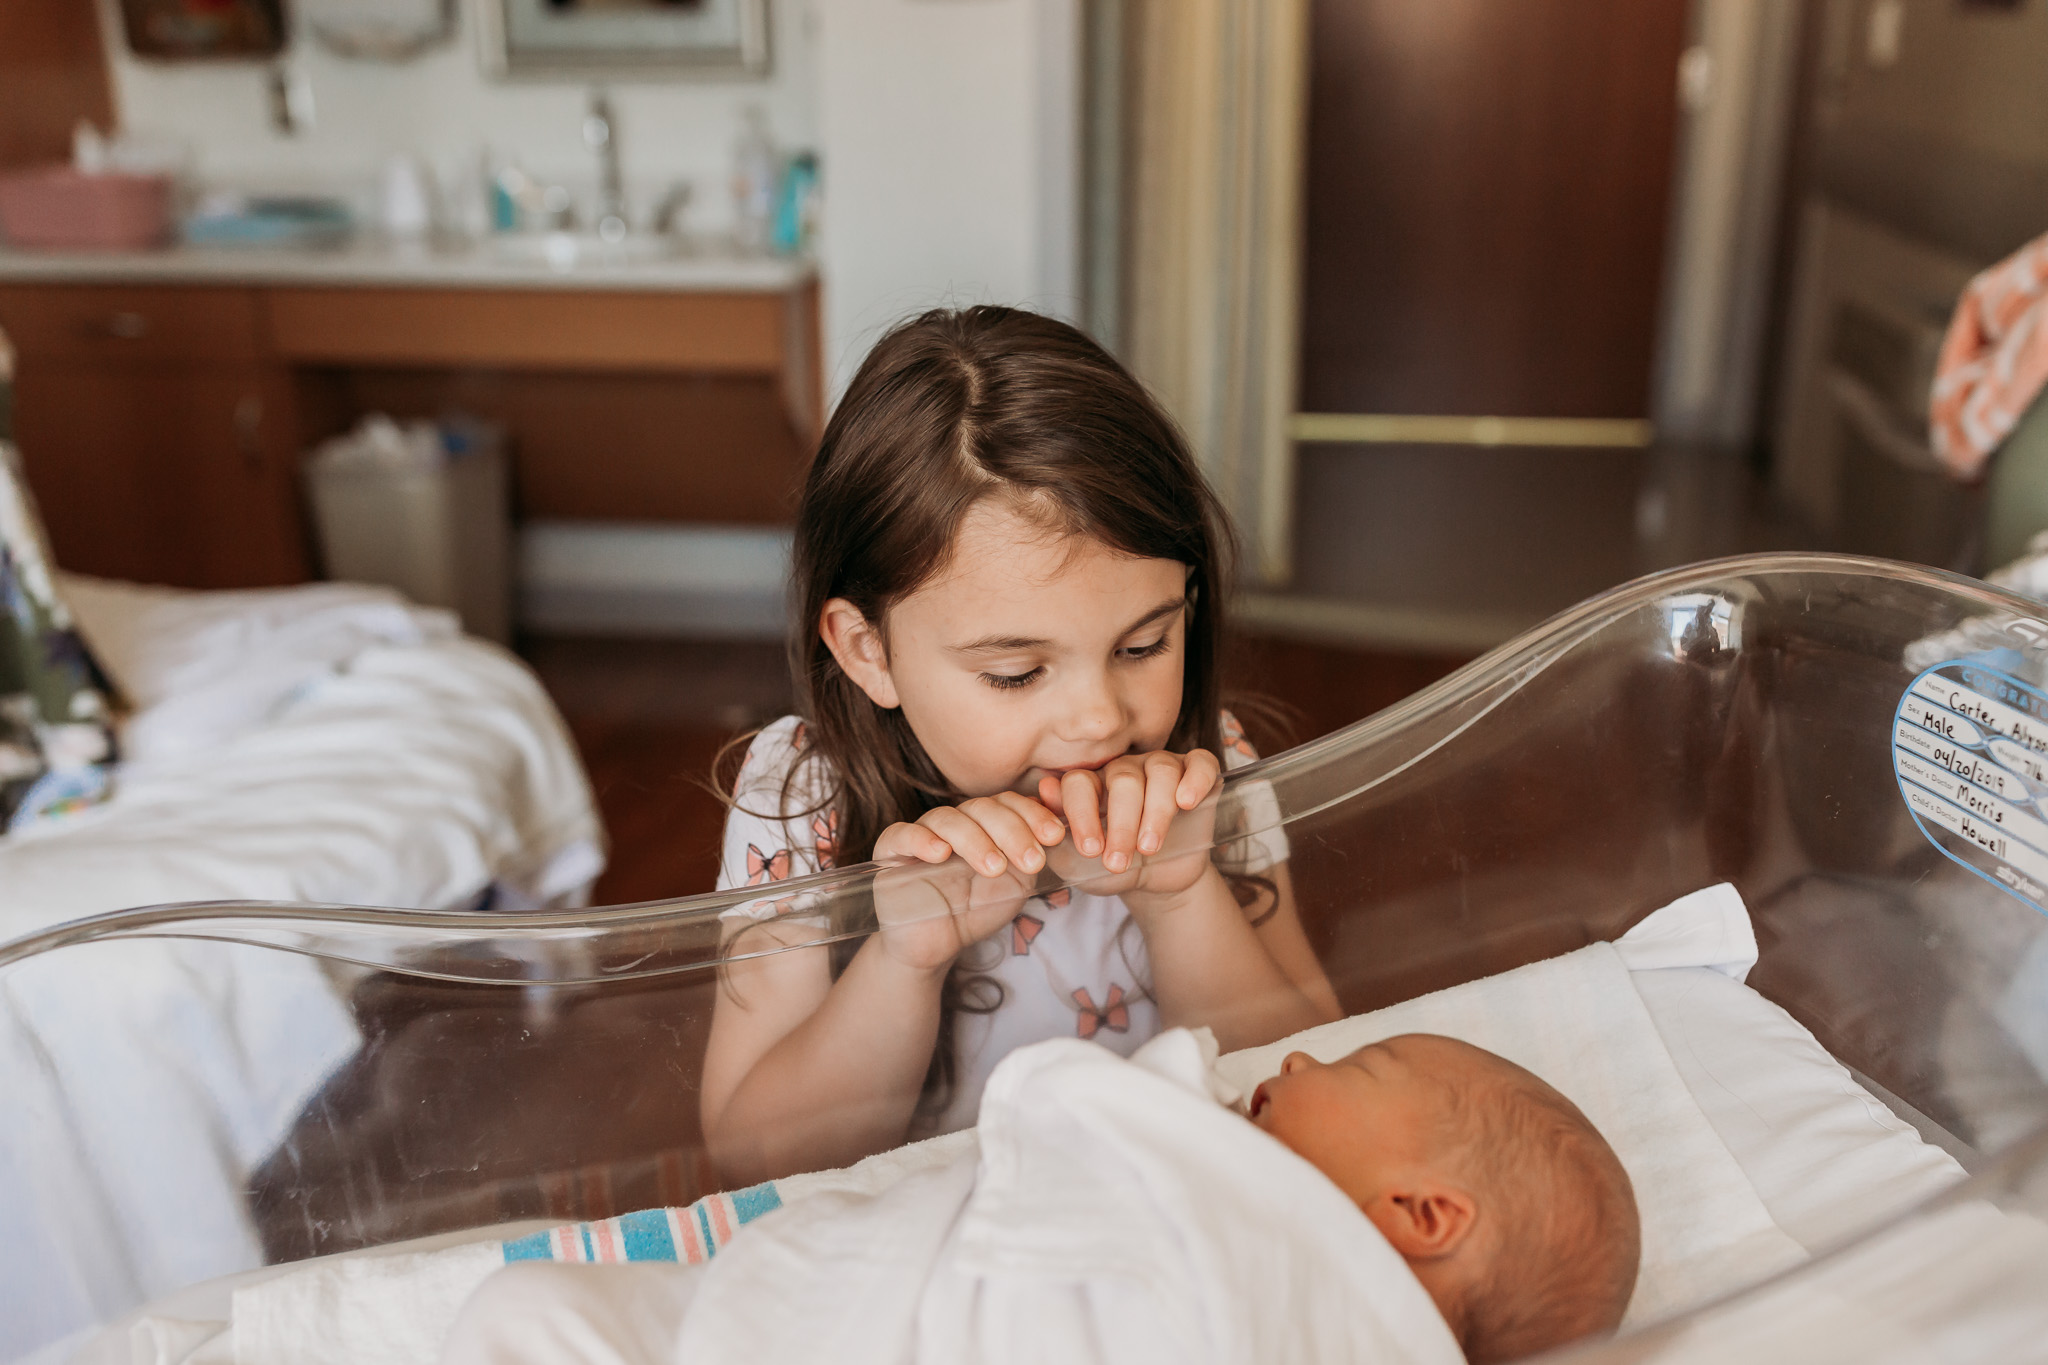 sister looks lovingly at newborn brother in bassinet